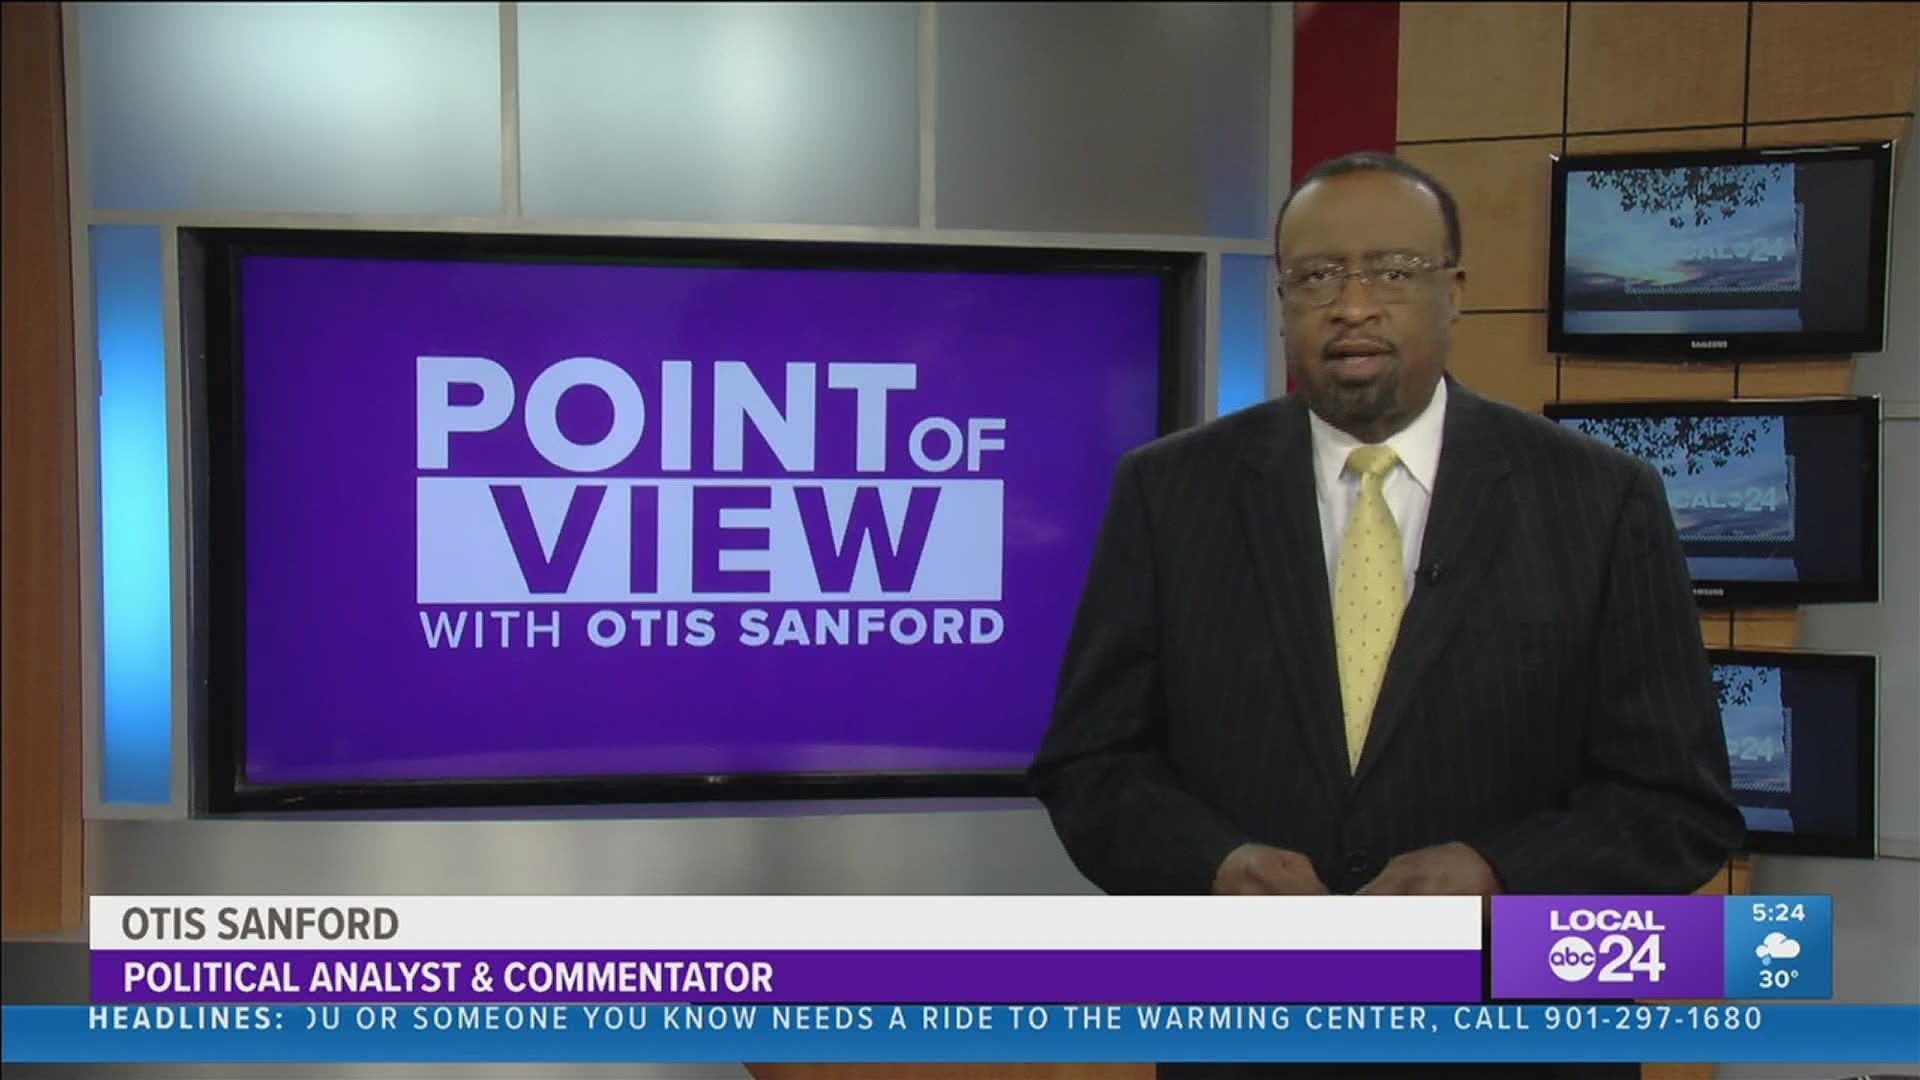 Local 24 News political analyst and commentator Otis Sanford shares his point of view on the push to return to in-person learning for schools.